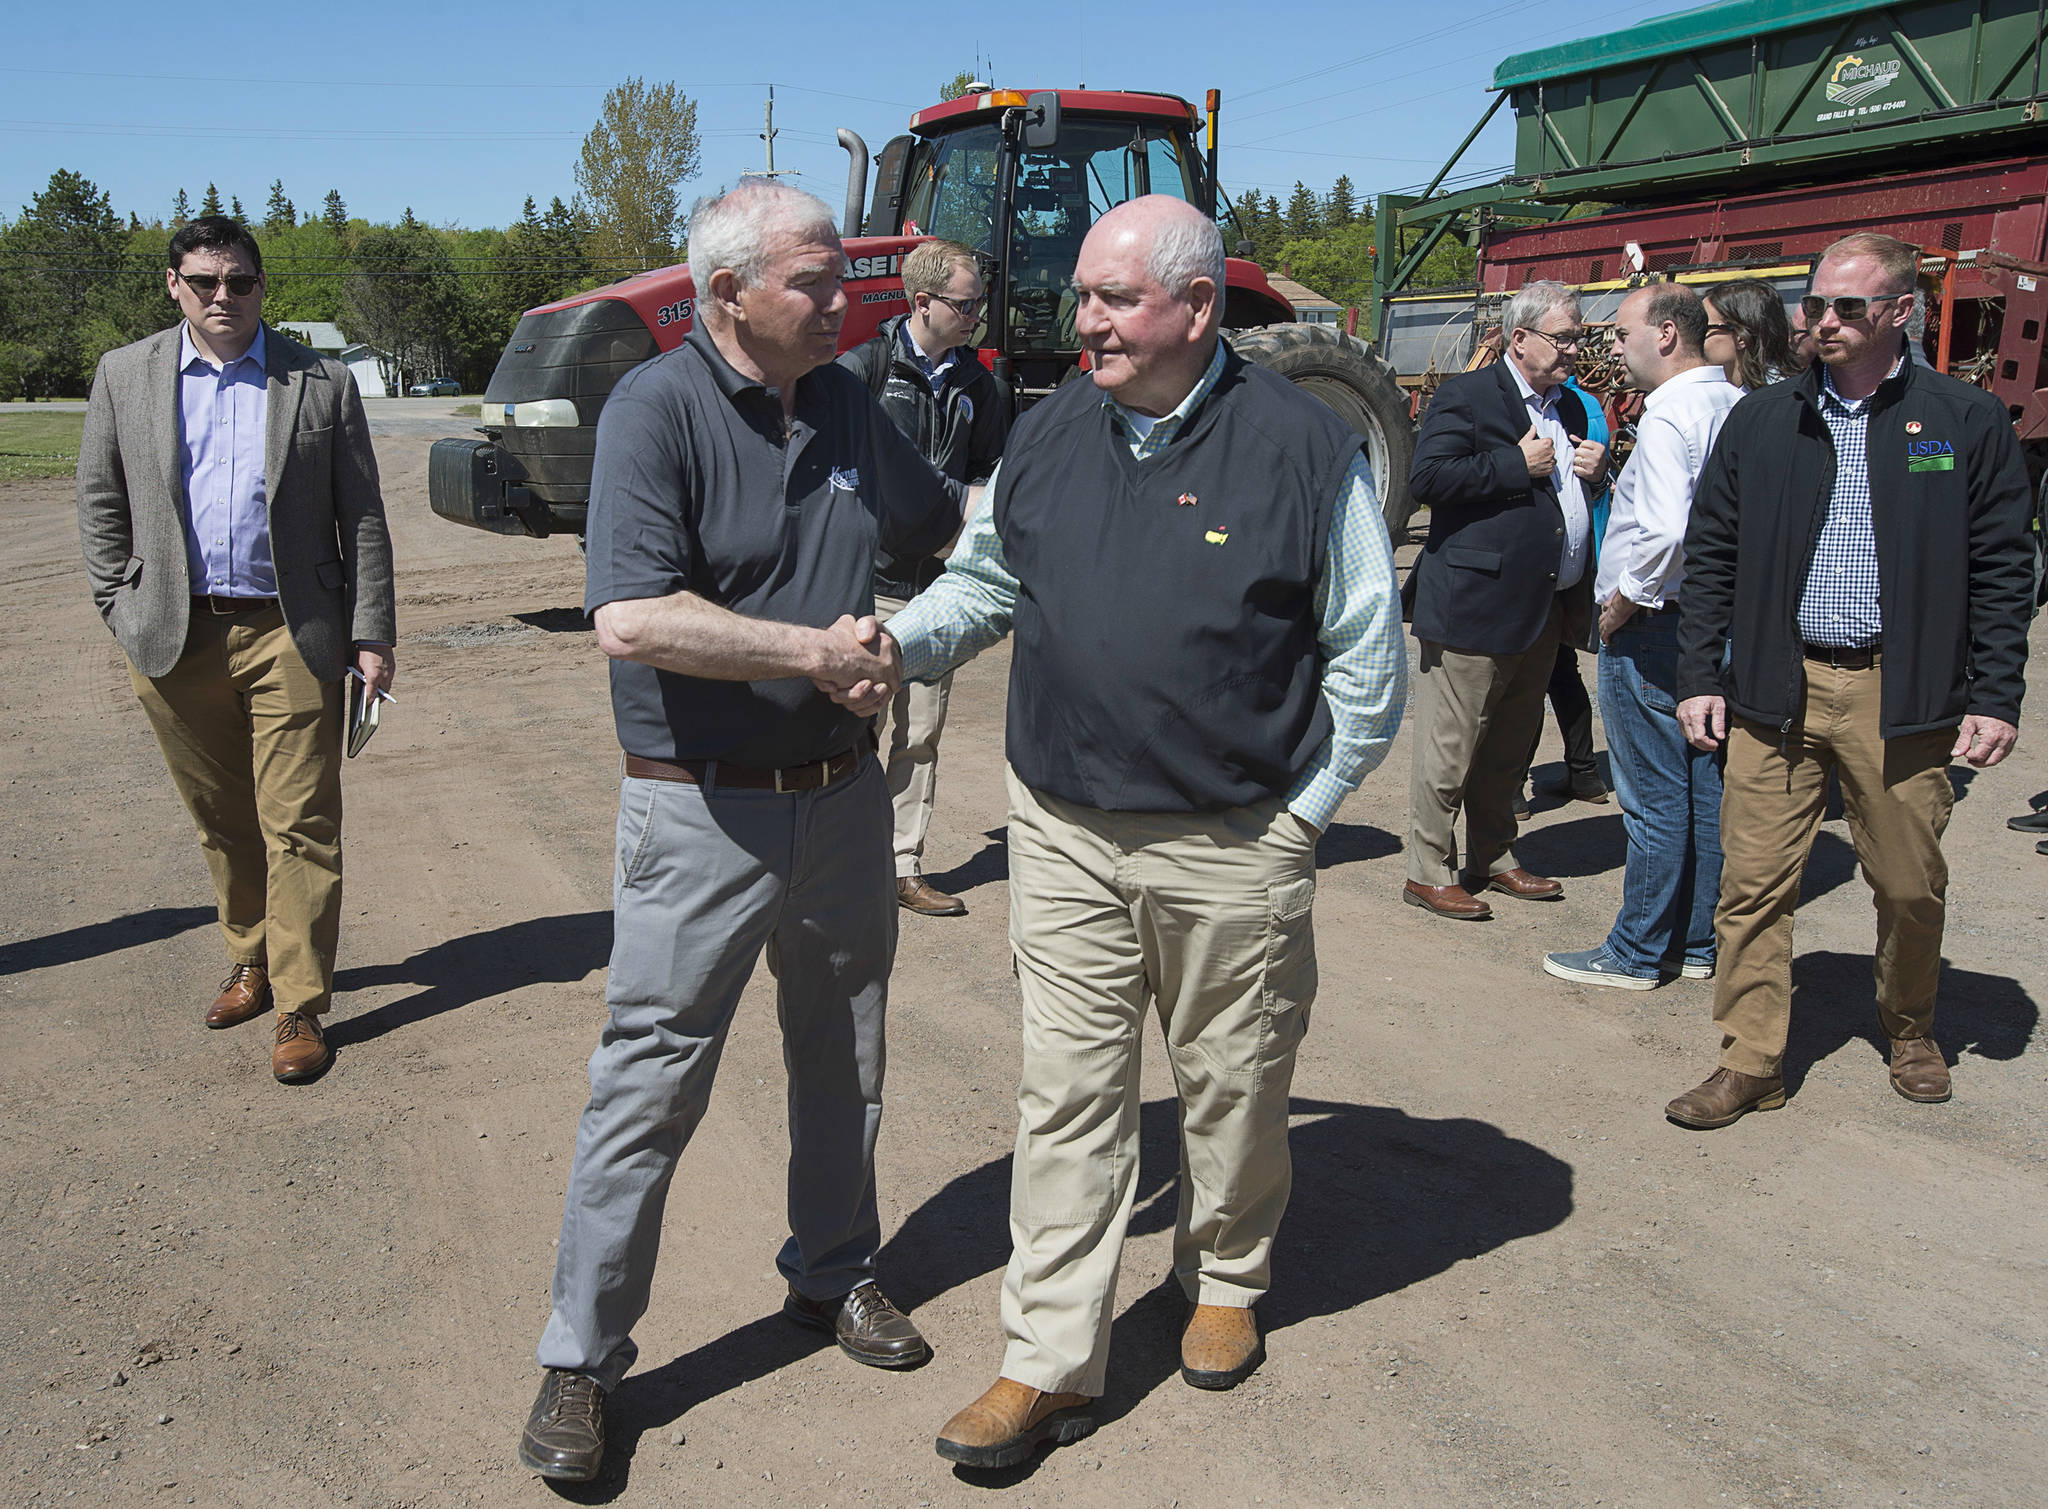 U.S. Secretary of Agriculture Sonny Perdue, right, shakes hands with owner Ray Keenan after touring Rollo Bay Holdings, which specializes in potato producing, marketing, shipping and exporting, in Souris, Prince Edward Island, Canada, on Friday, June 15, 2018. (Andrew Vaughan/The Canadian Press via AP)